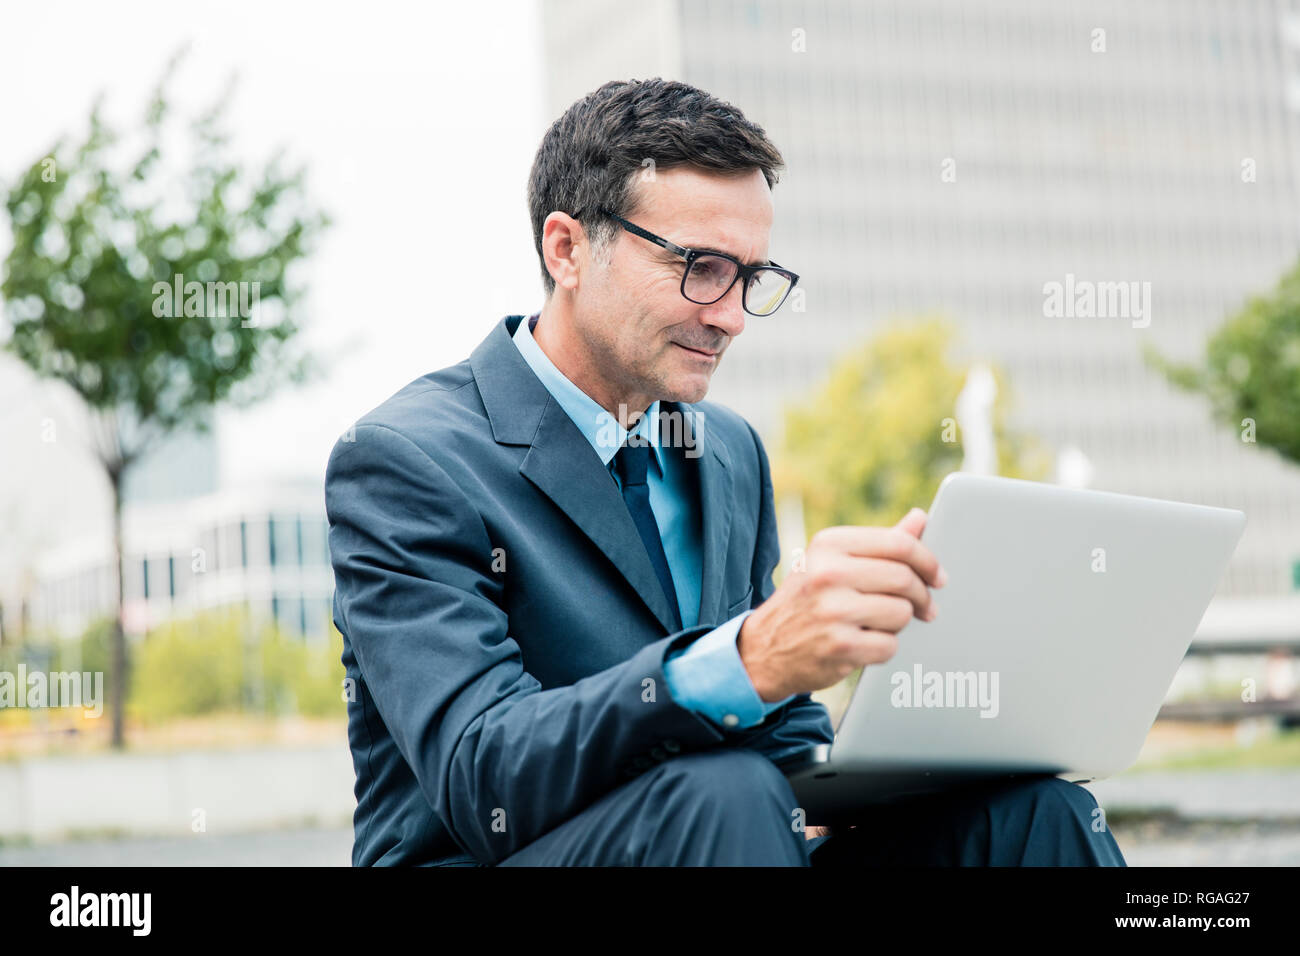 Businessman sitting down using laptop in the city Stock Photo